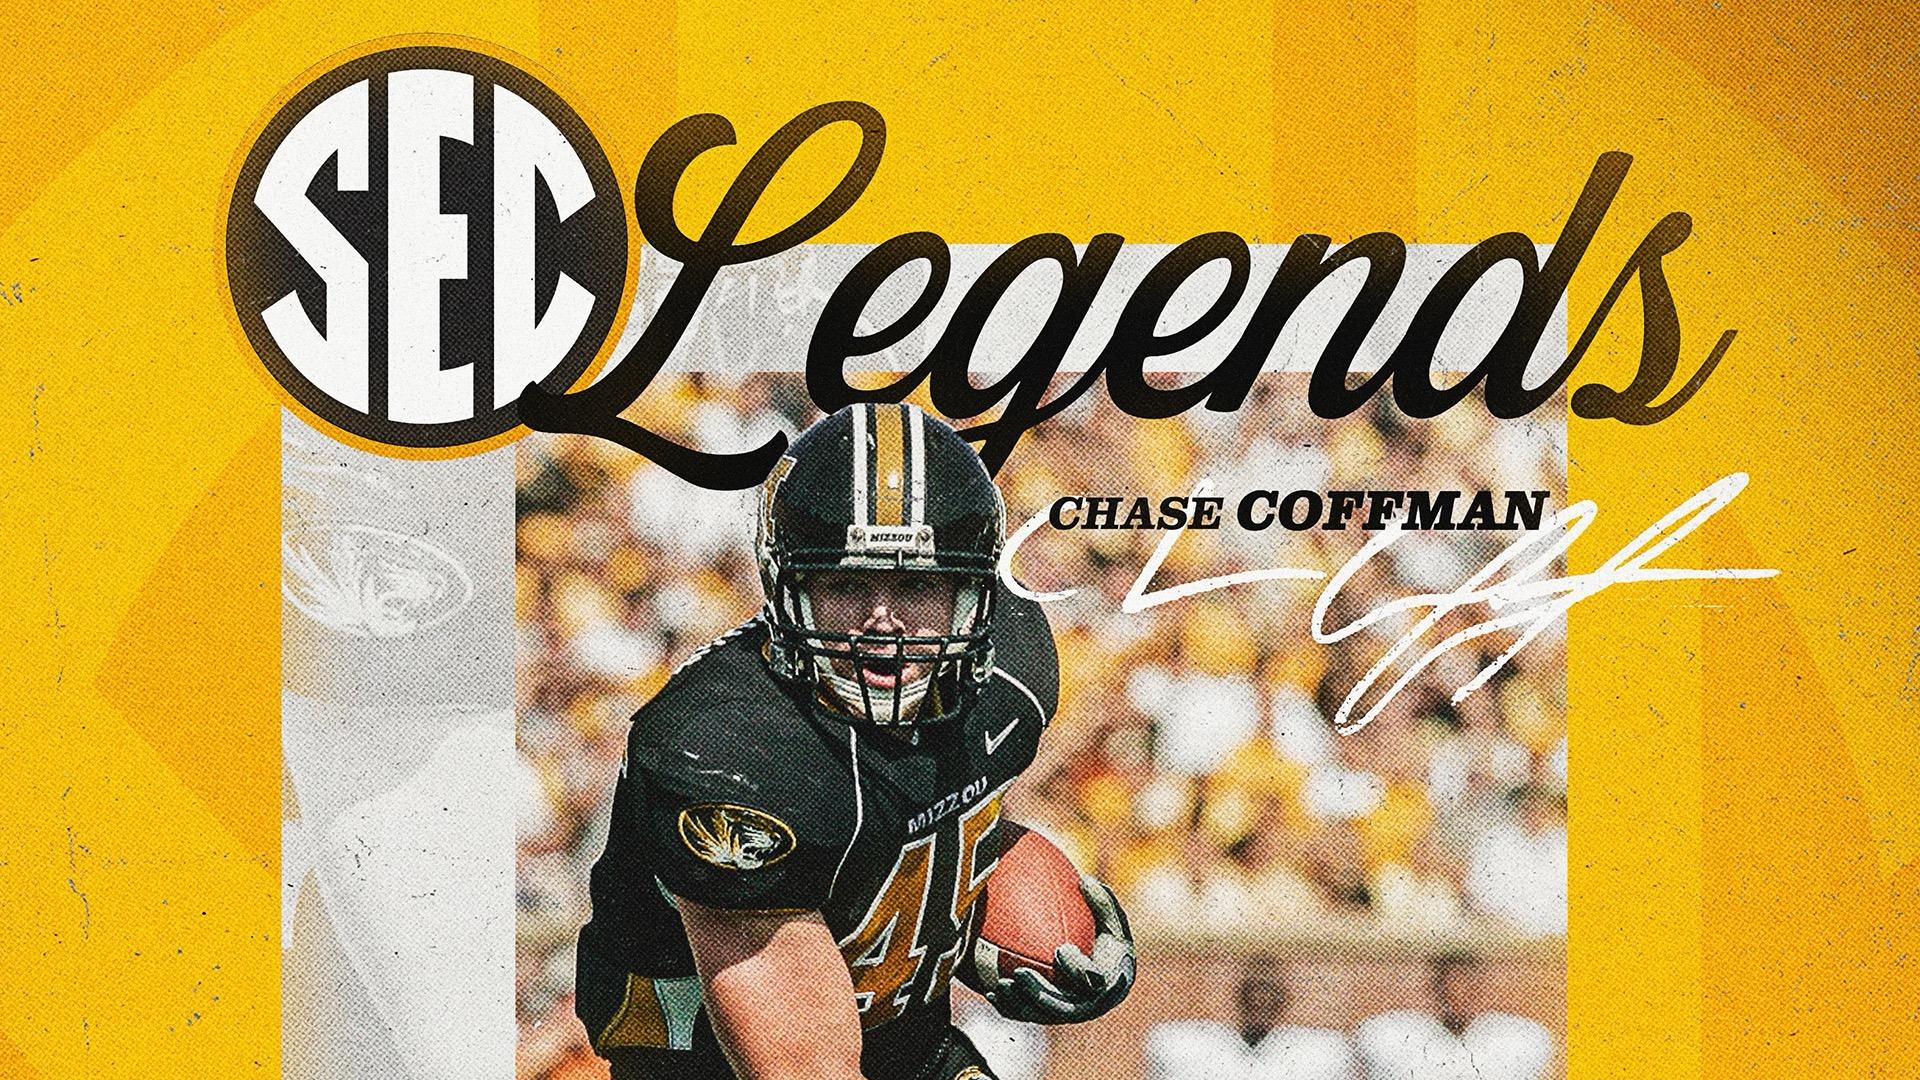 2023 SEC FB Legends - Chase Coffman - wide